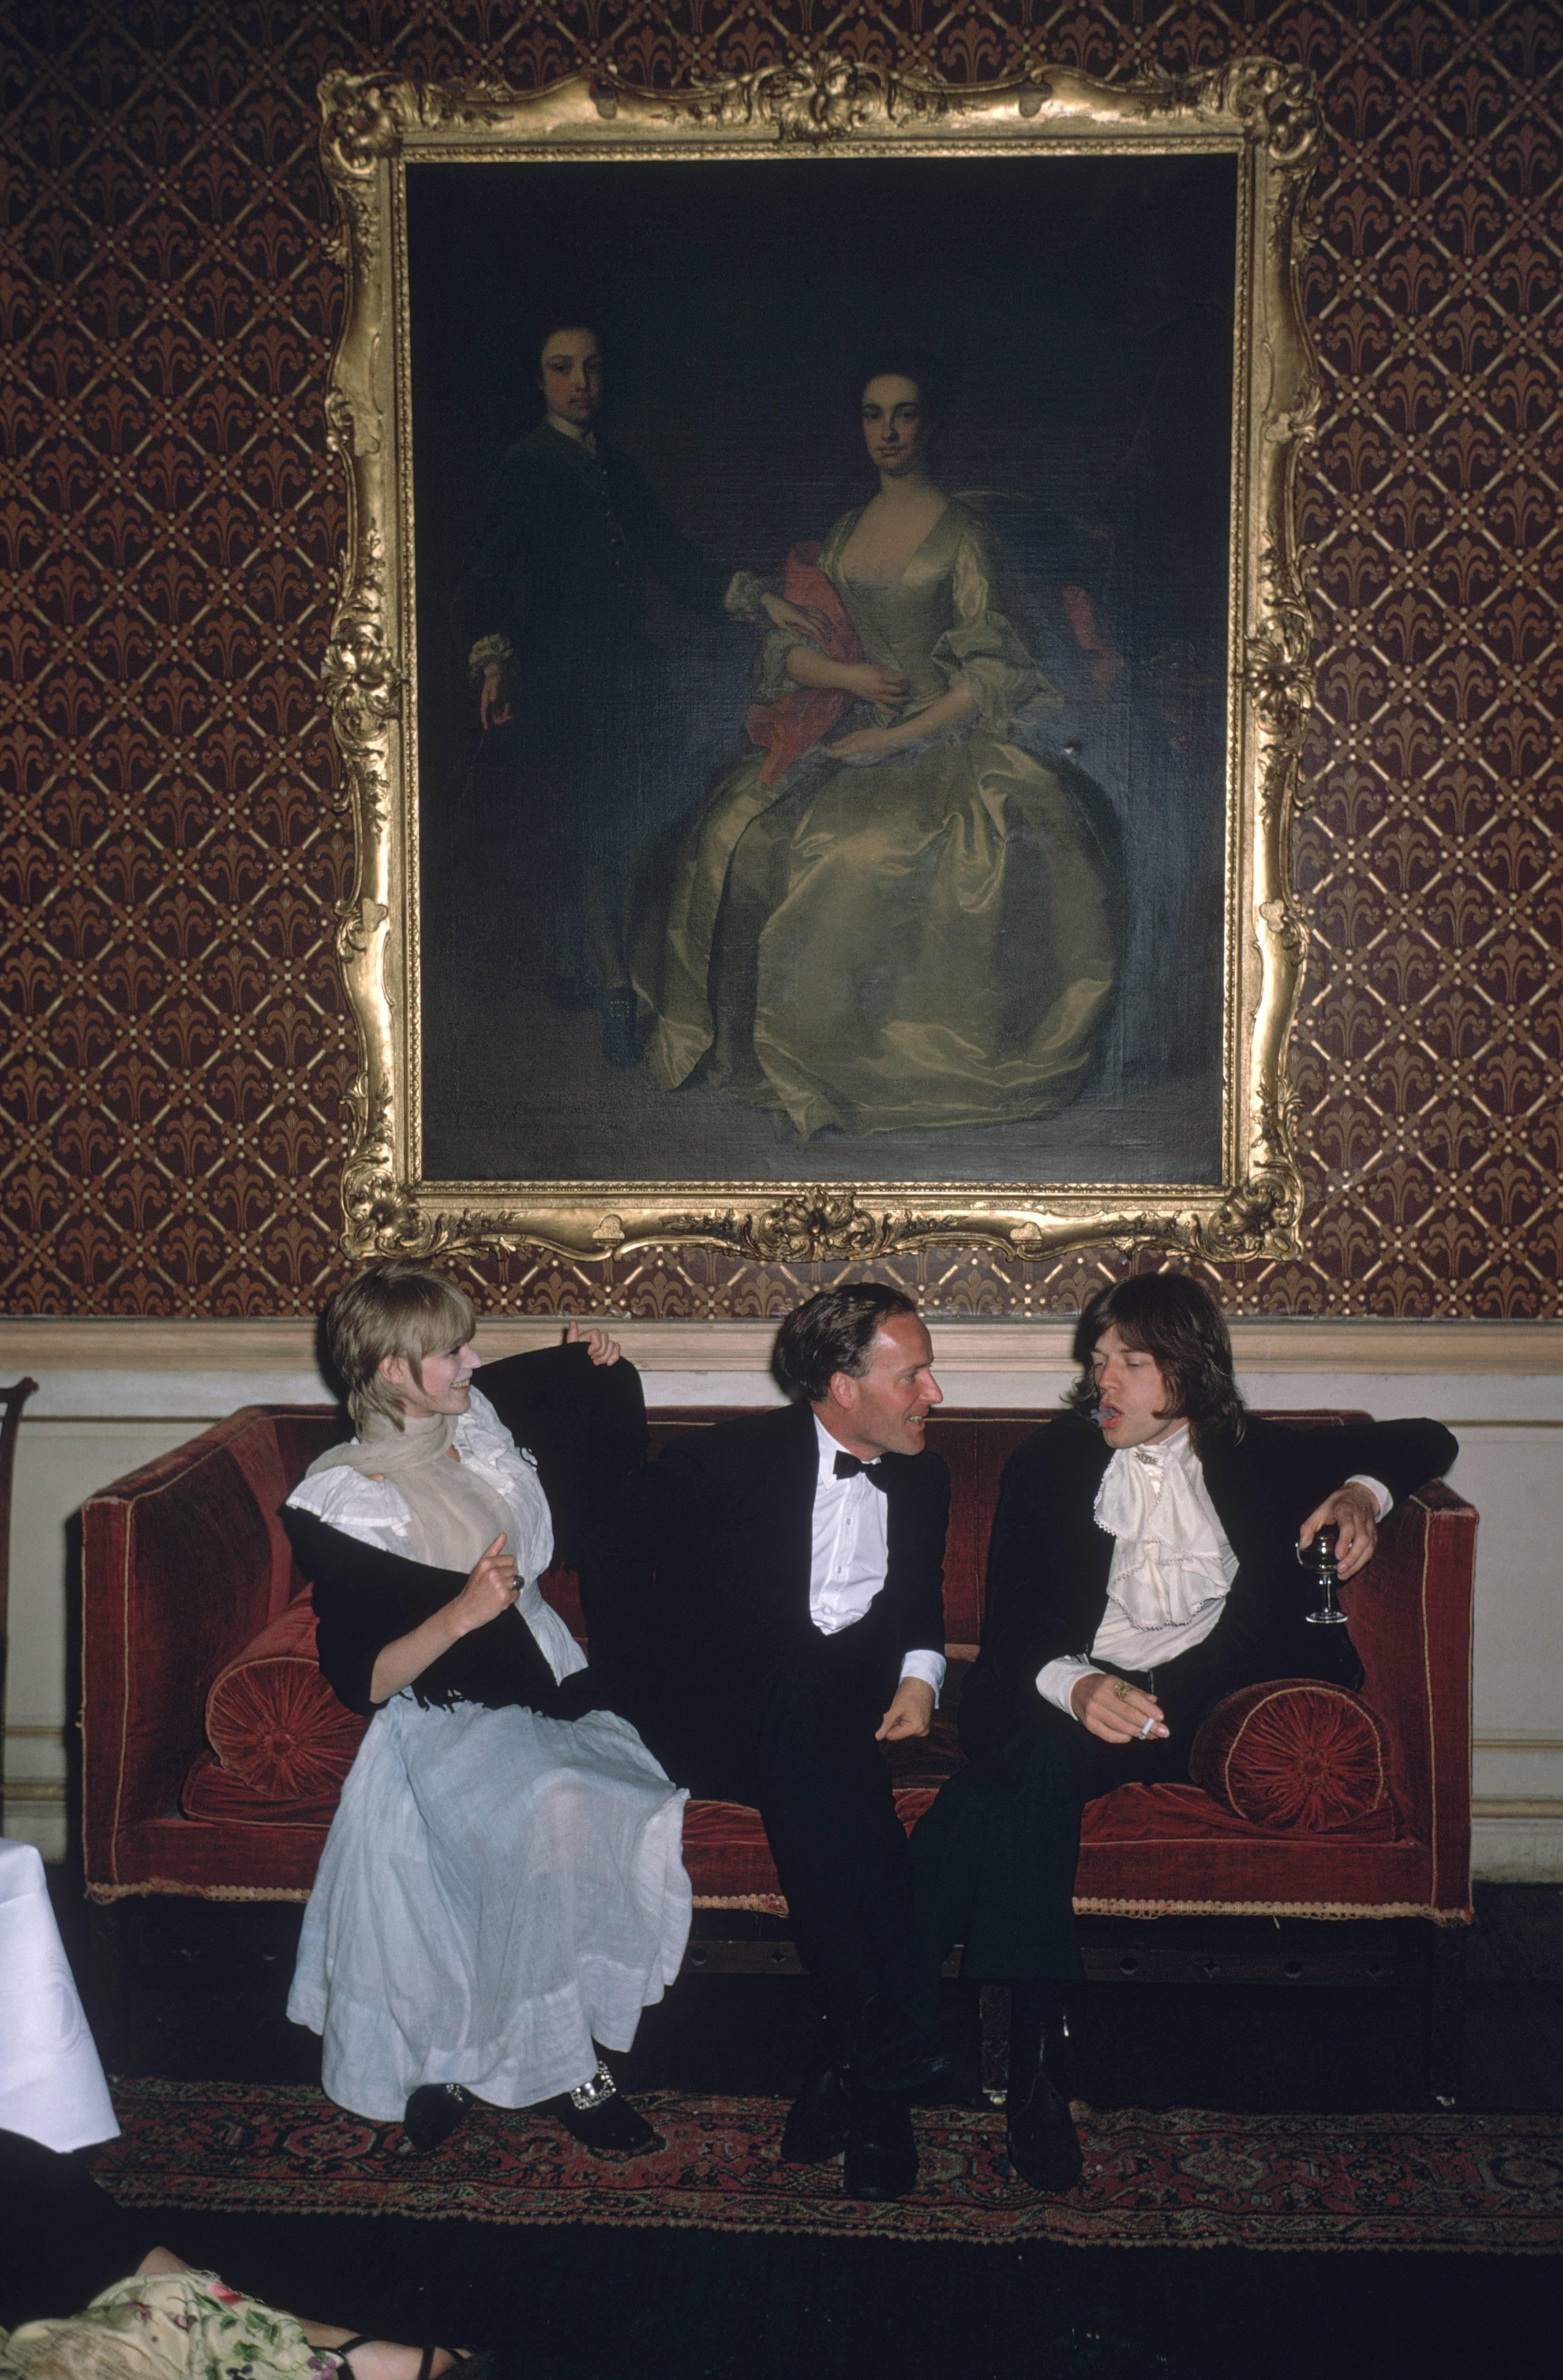 1968: From left to right; singer Marianne Faithfull, the Honorable Desmond Guinness and Mick Jagger (of the Rolling Stones) sit on a sofa under a large gilt framed painting of a woman in 18th century dress at Leixlip Castle, Ireland, the home of